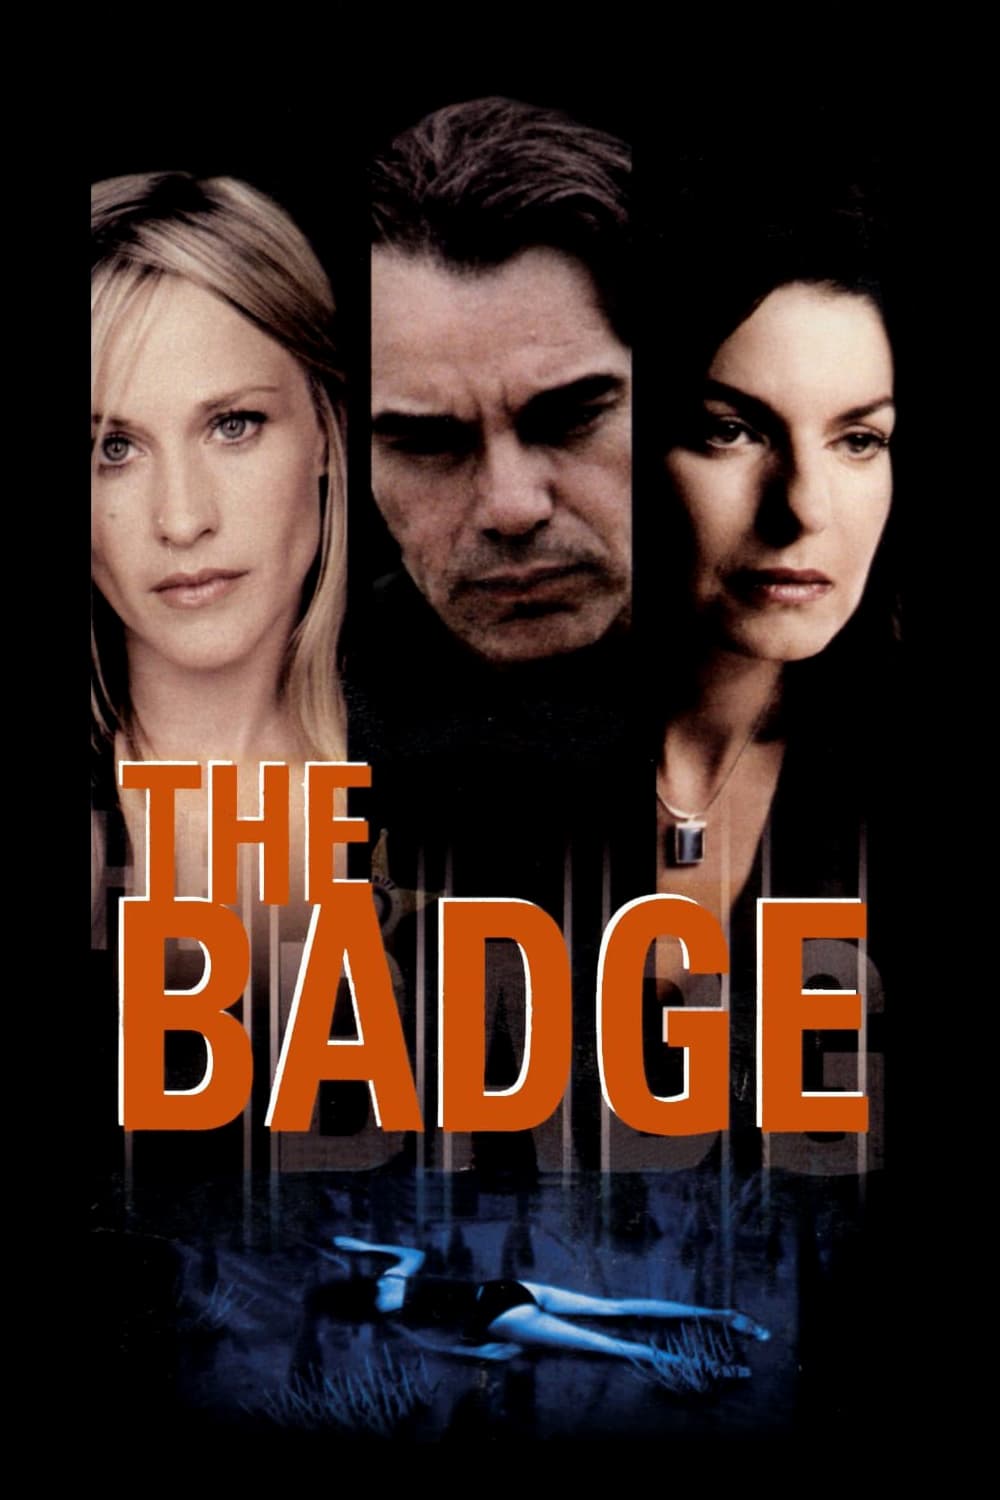 The Badge (2002)